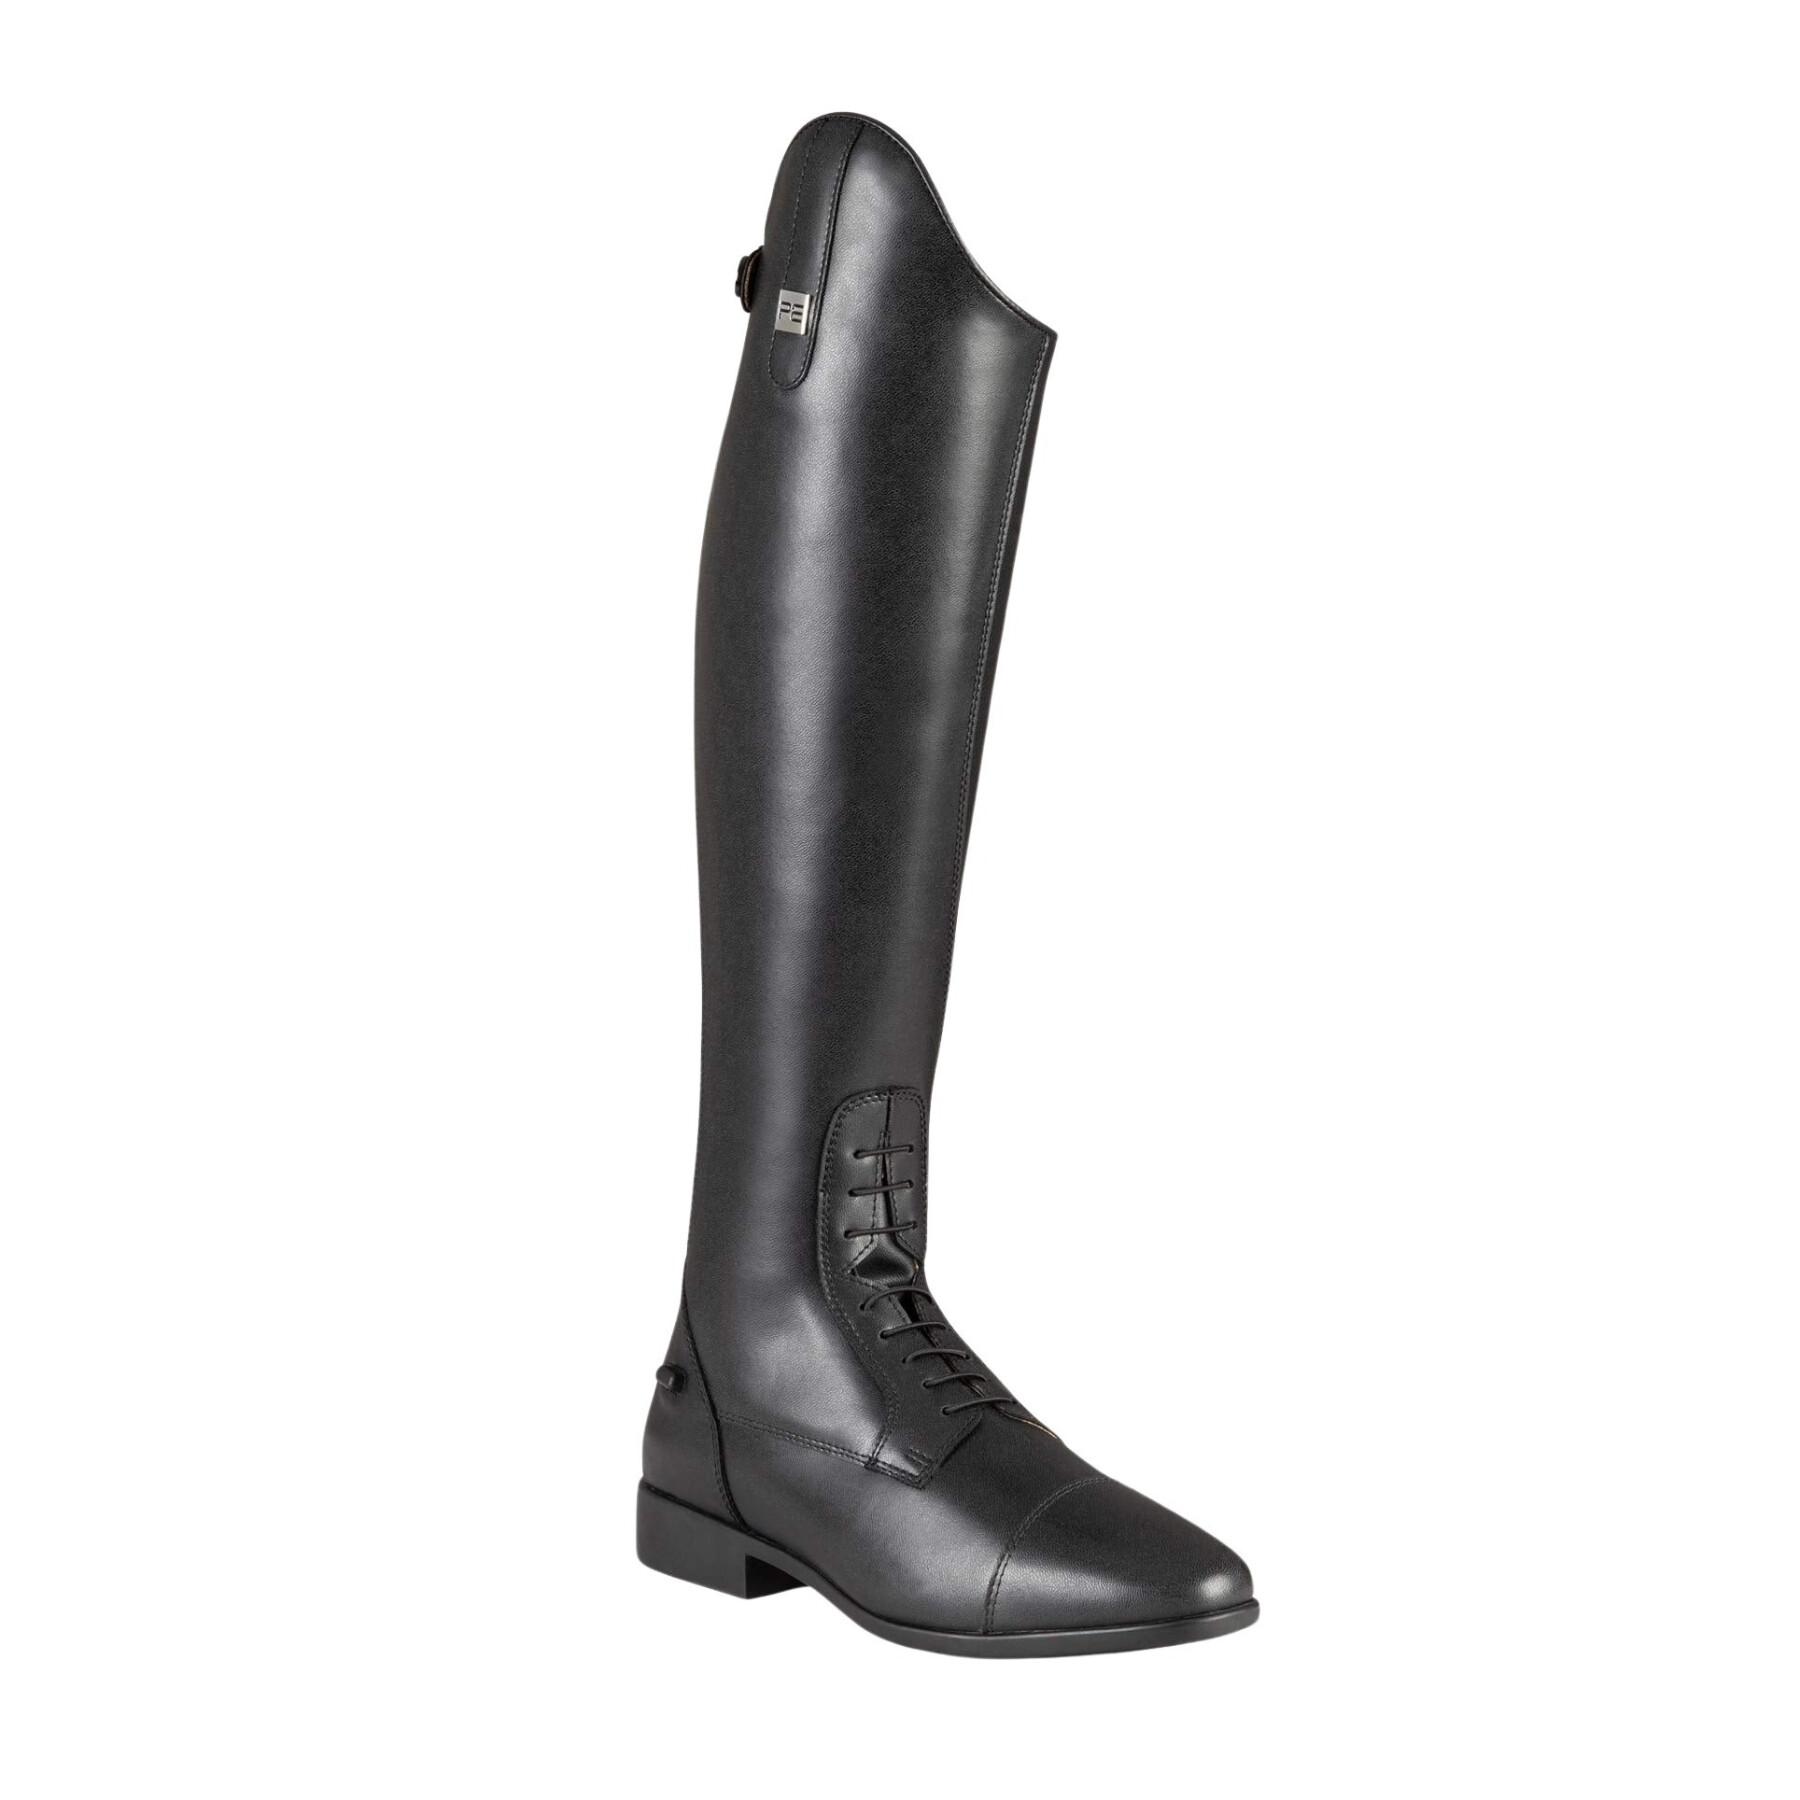 Women's synthetic riding boots Premier Equine Anima